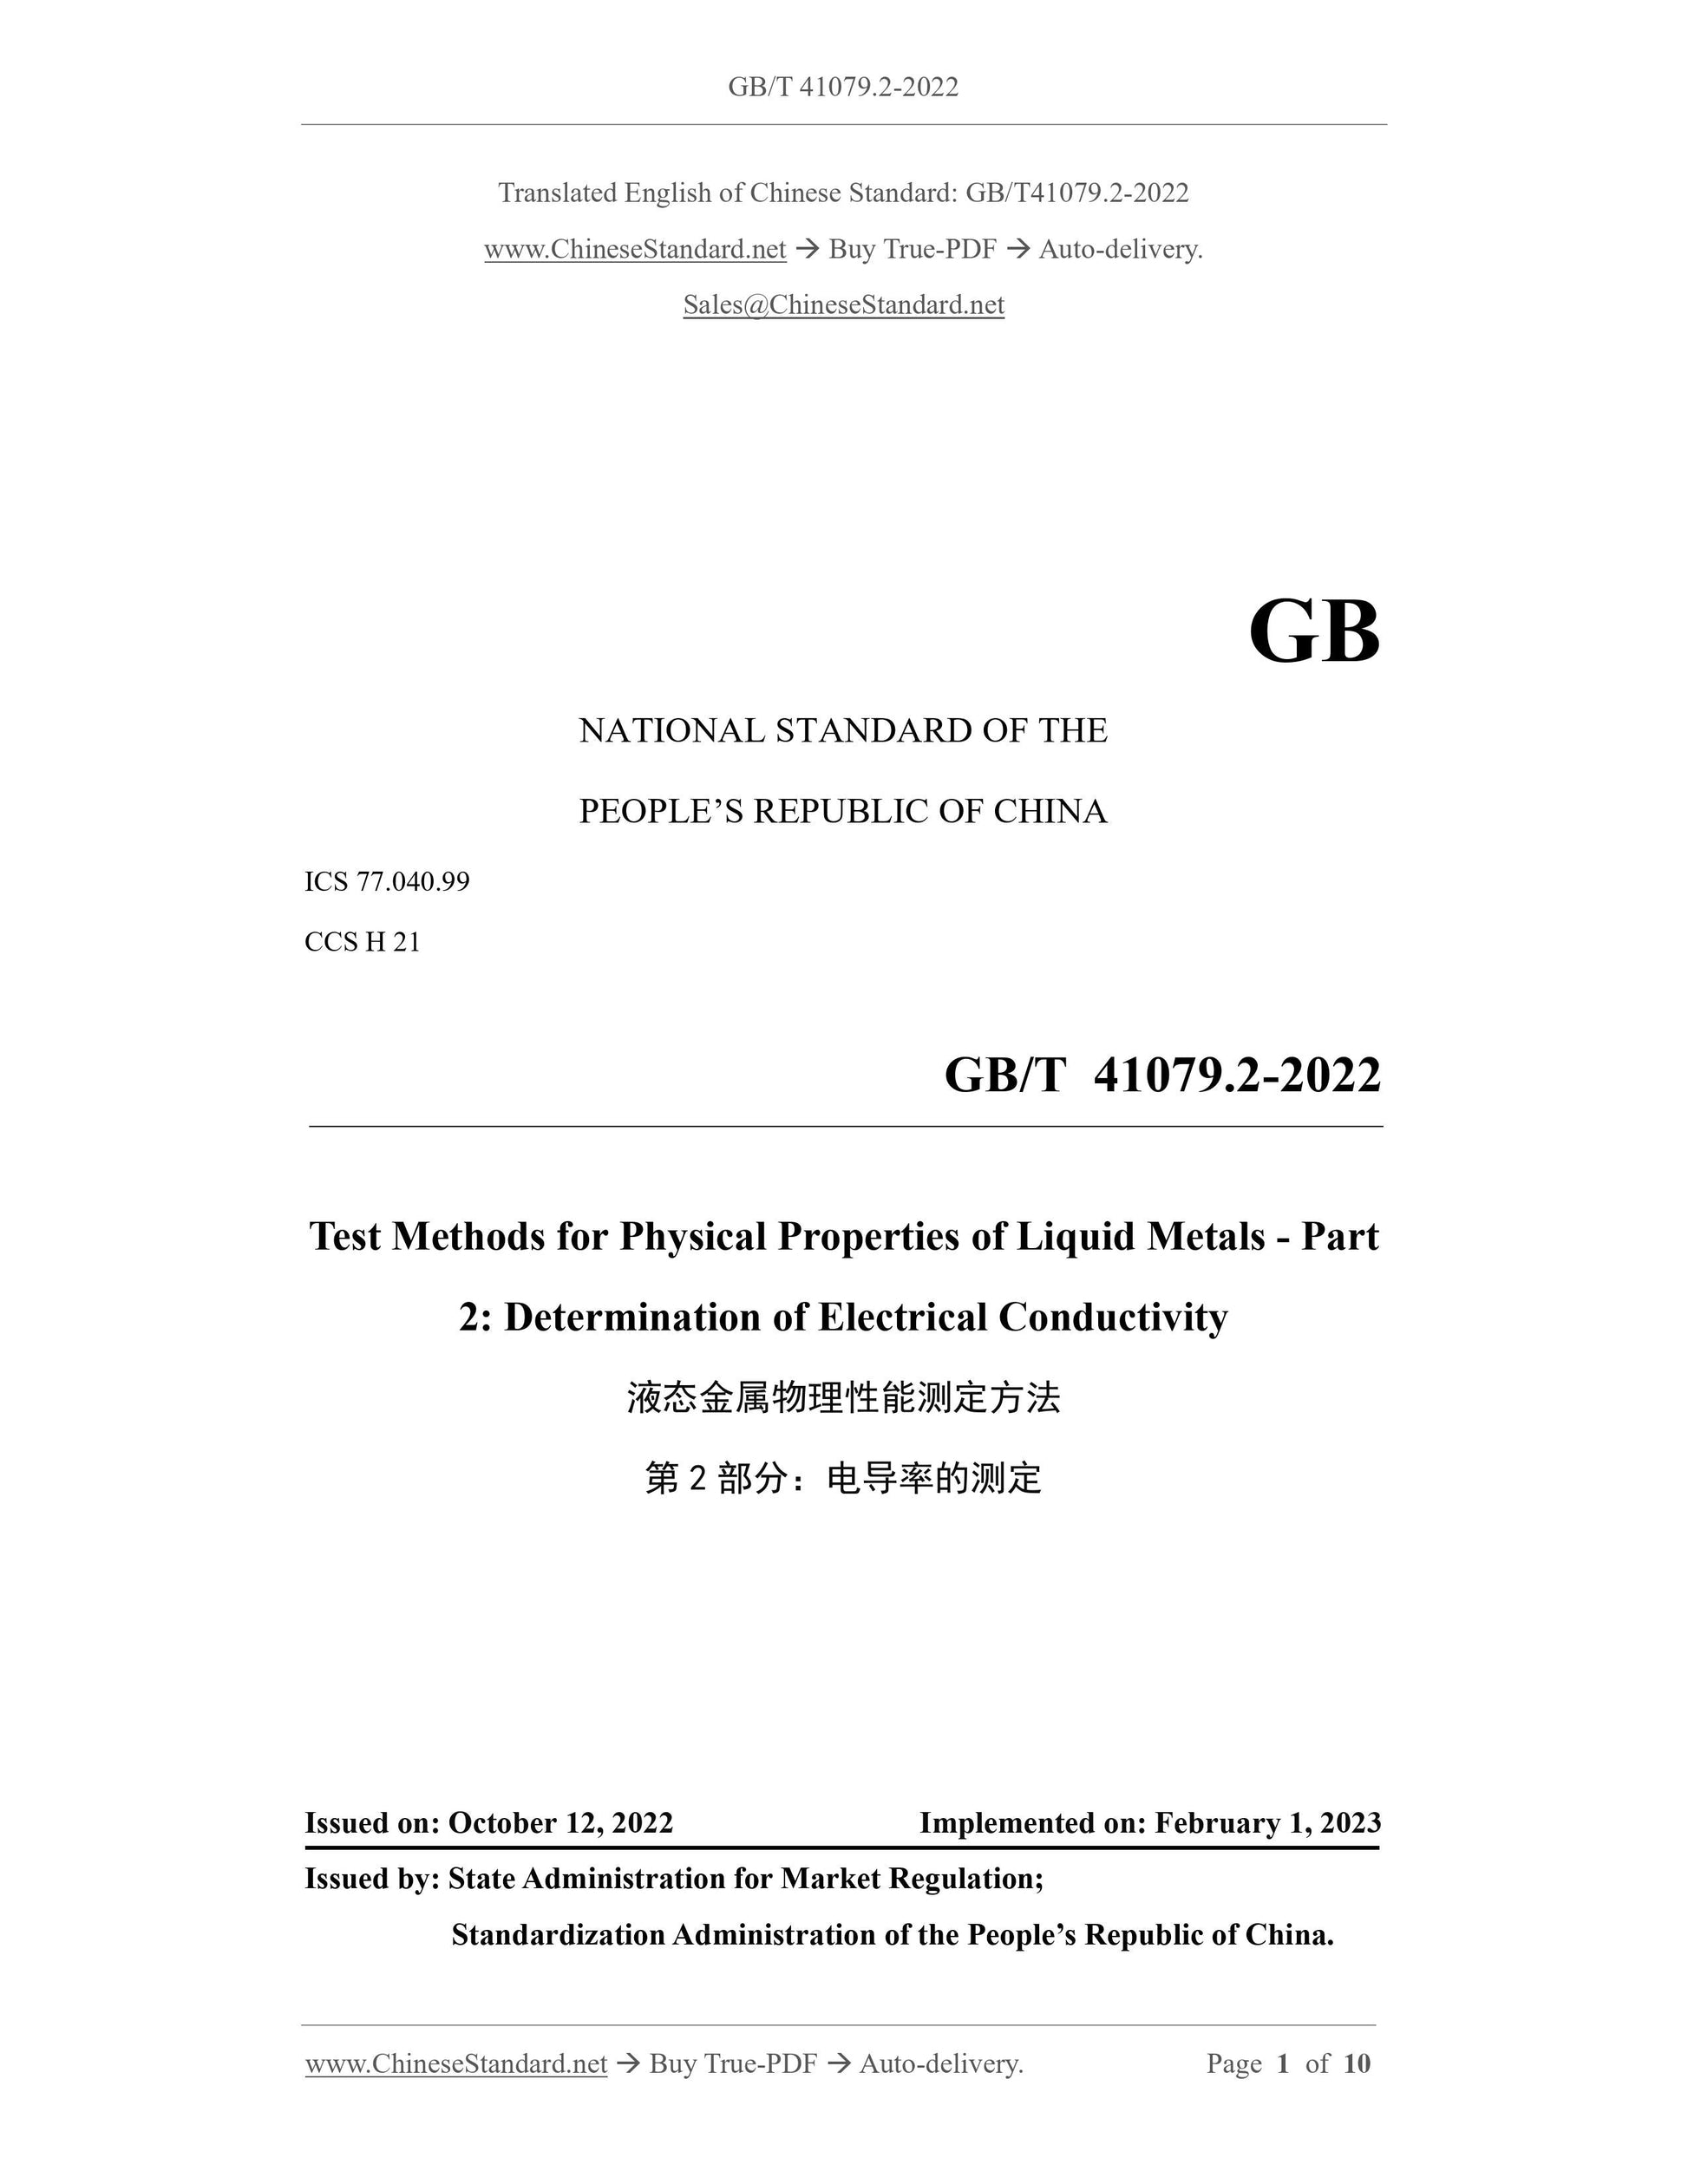 GB/T 41079.2-2022 Page 1